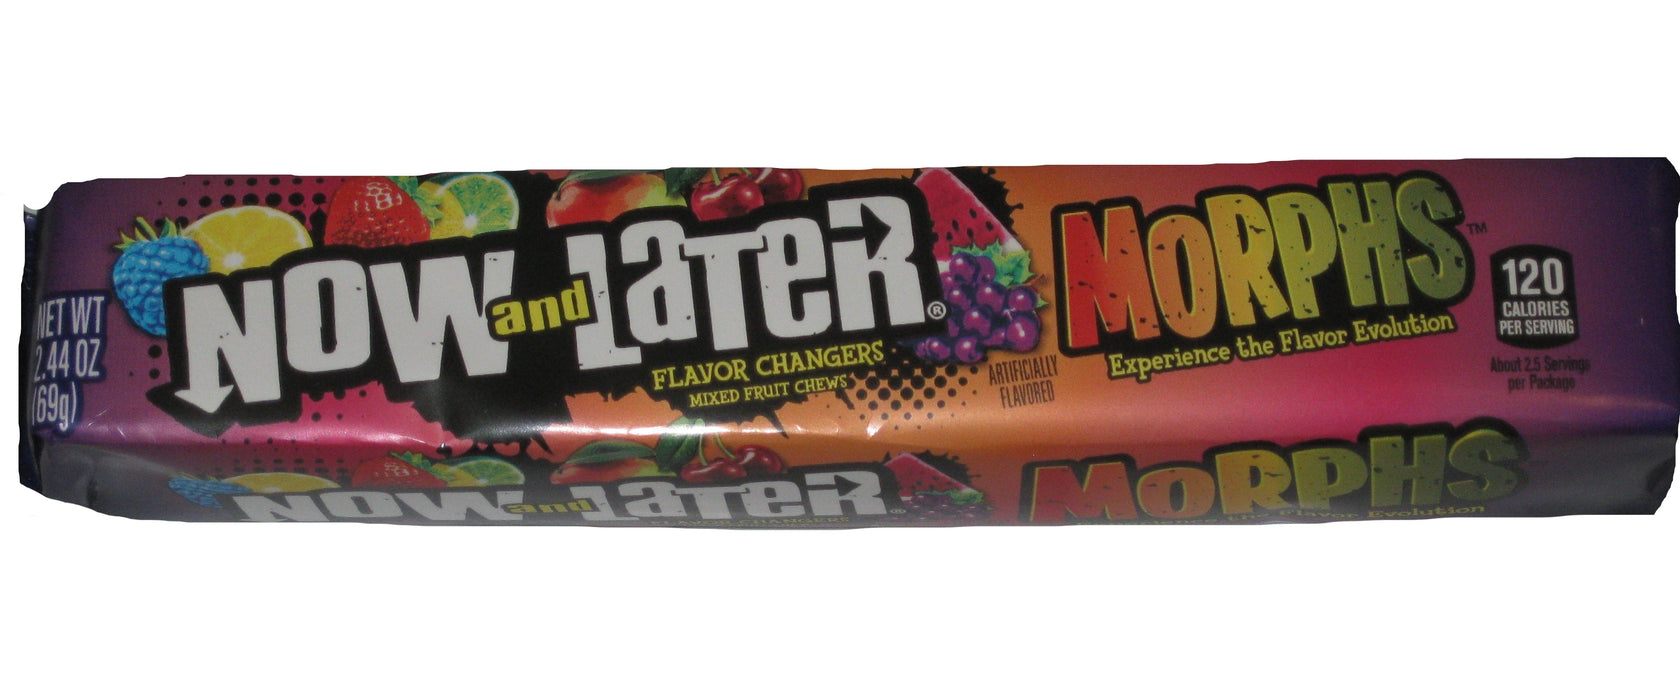 Now and Later Flavor Morphs Bar